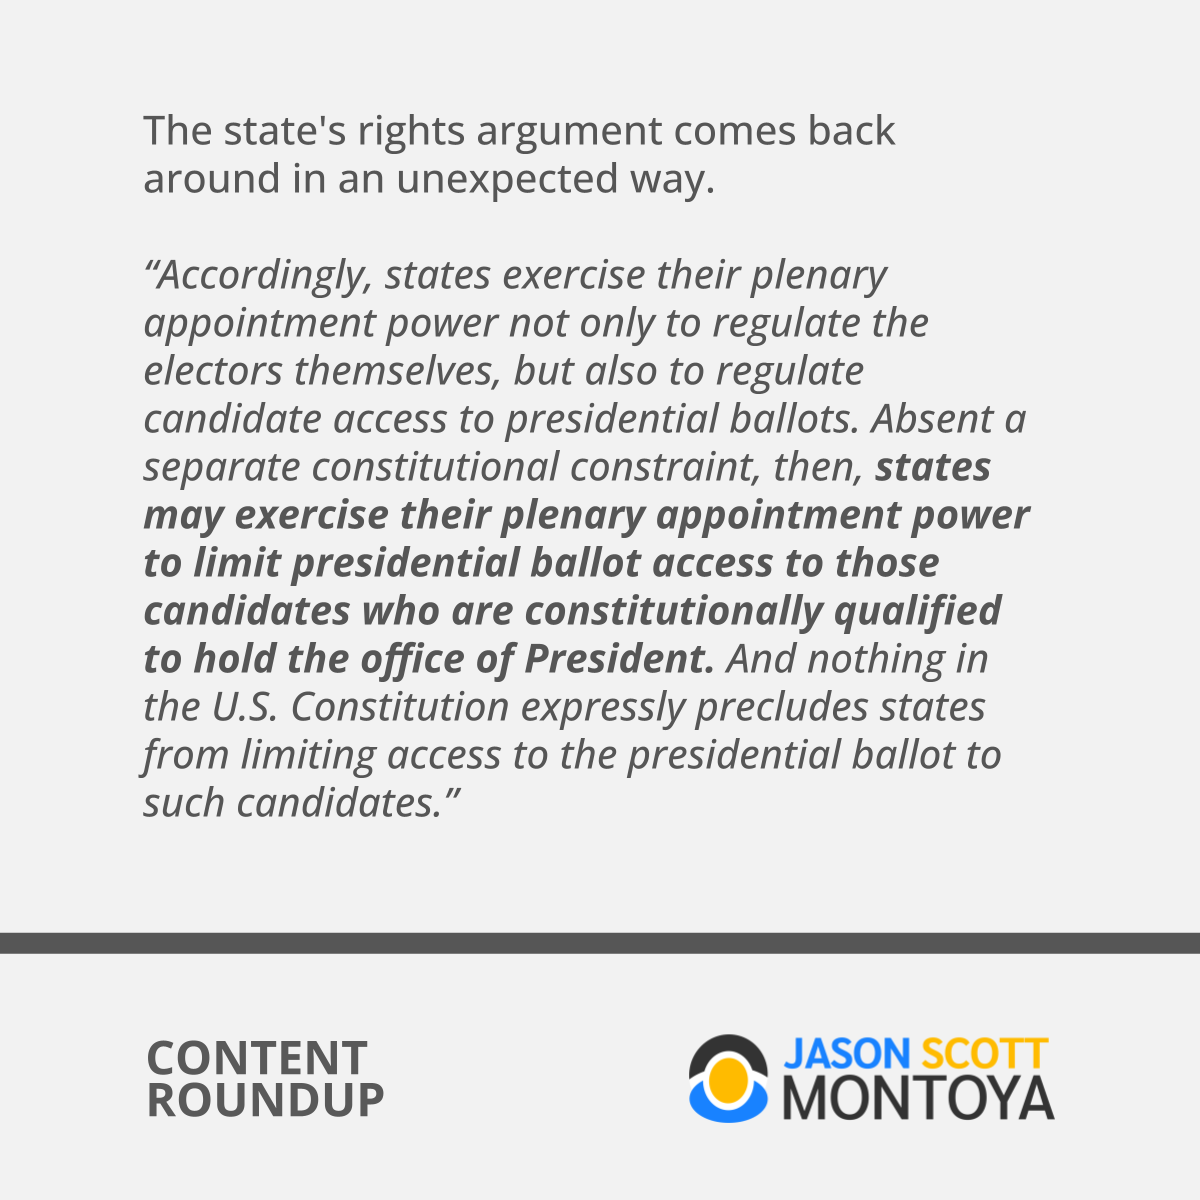 The state's rights argument comes back around in an unexpected way.  “Accordingly, states exercise their plenary appointment power not only to regulate the electors themselves, but also to regulate candidate access to presidential ballots. Absent a separate constitutional constraint, then, states may exercise their plenary appointment power to limit presidential ballot access to those candidates who are constitutionally qualified to hold the office of President. And nothing in the U.S. Constitution expressly precludes states from limiting access to the presidential ballot to such candidates.”